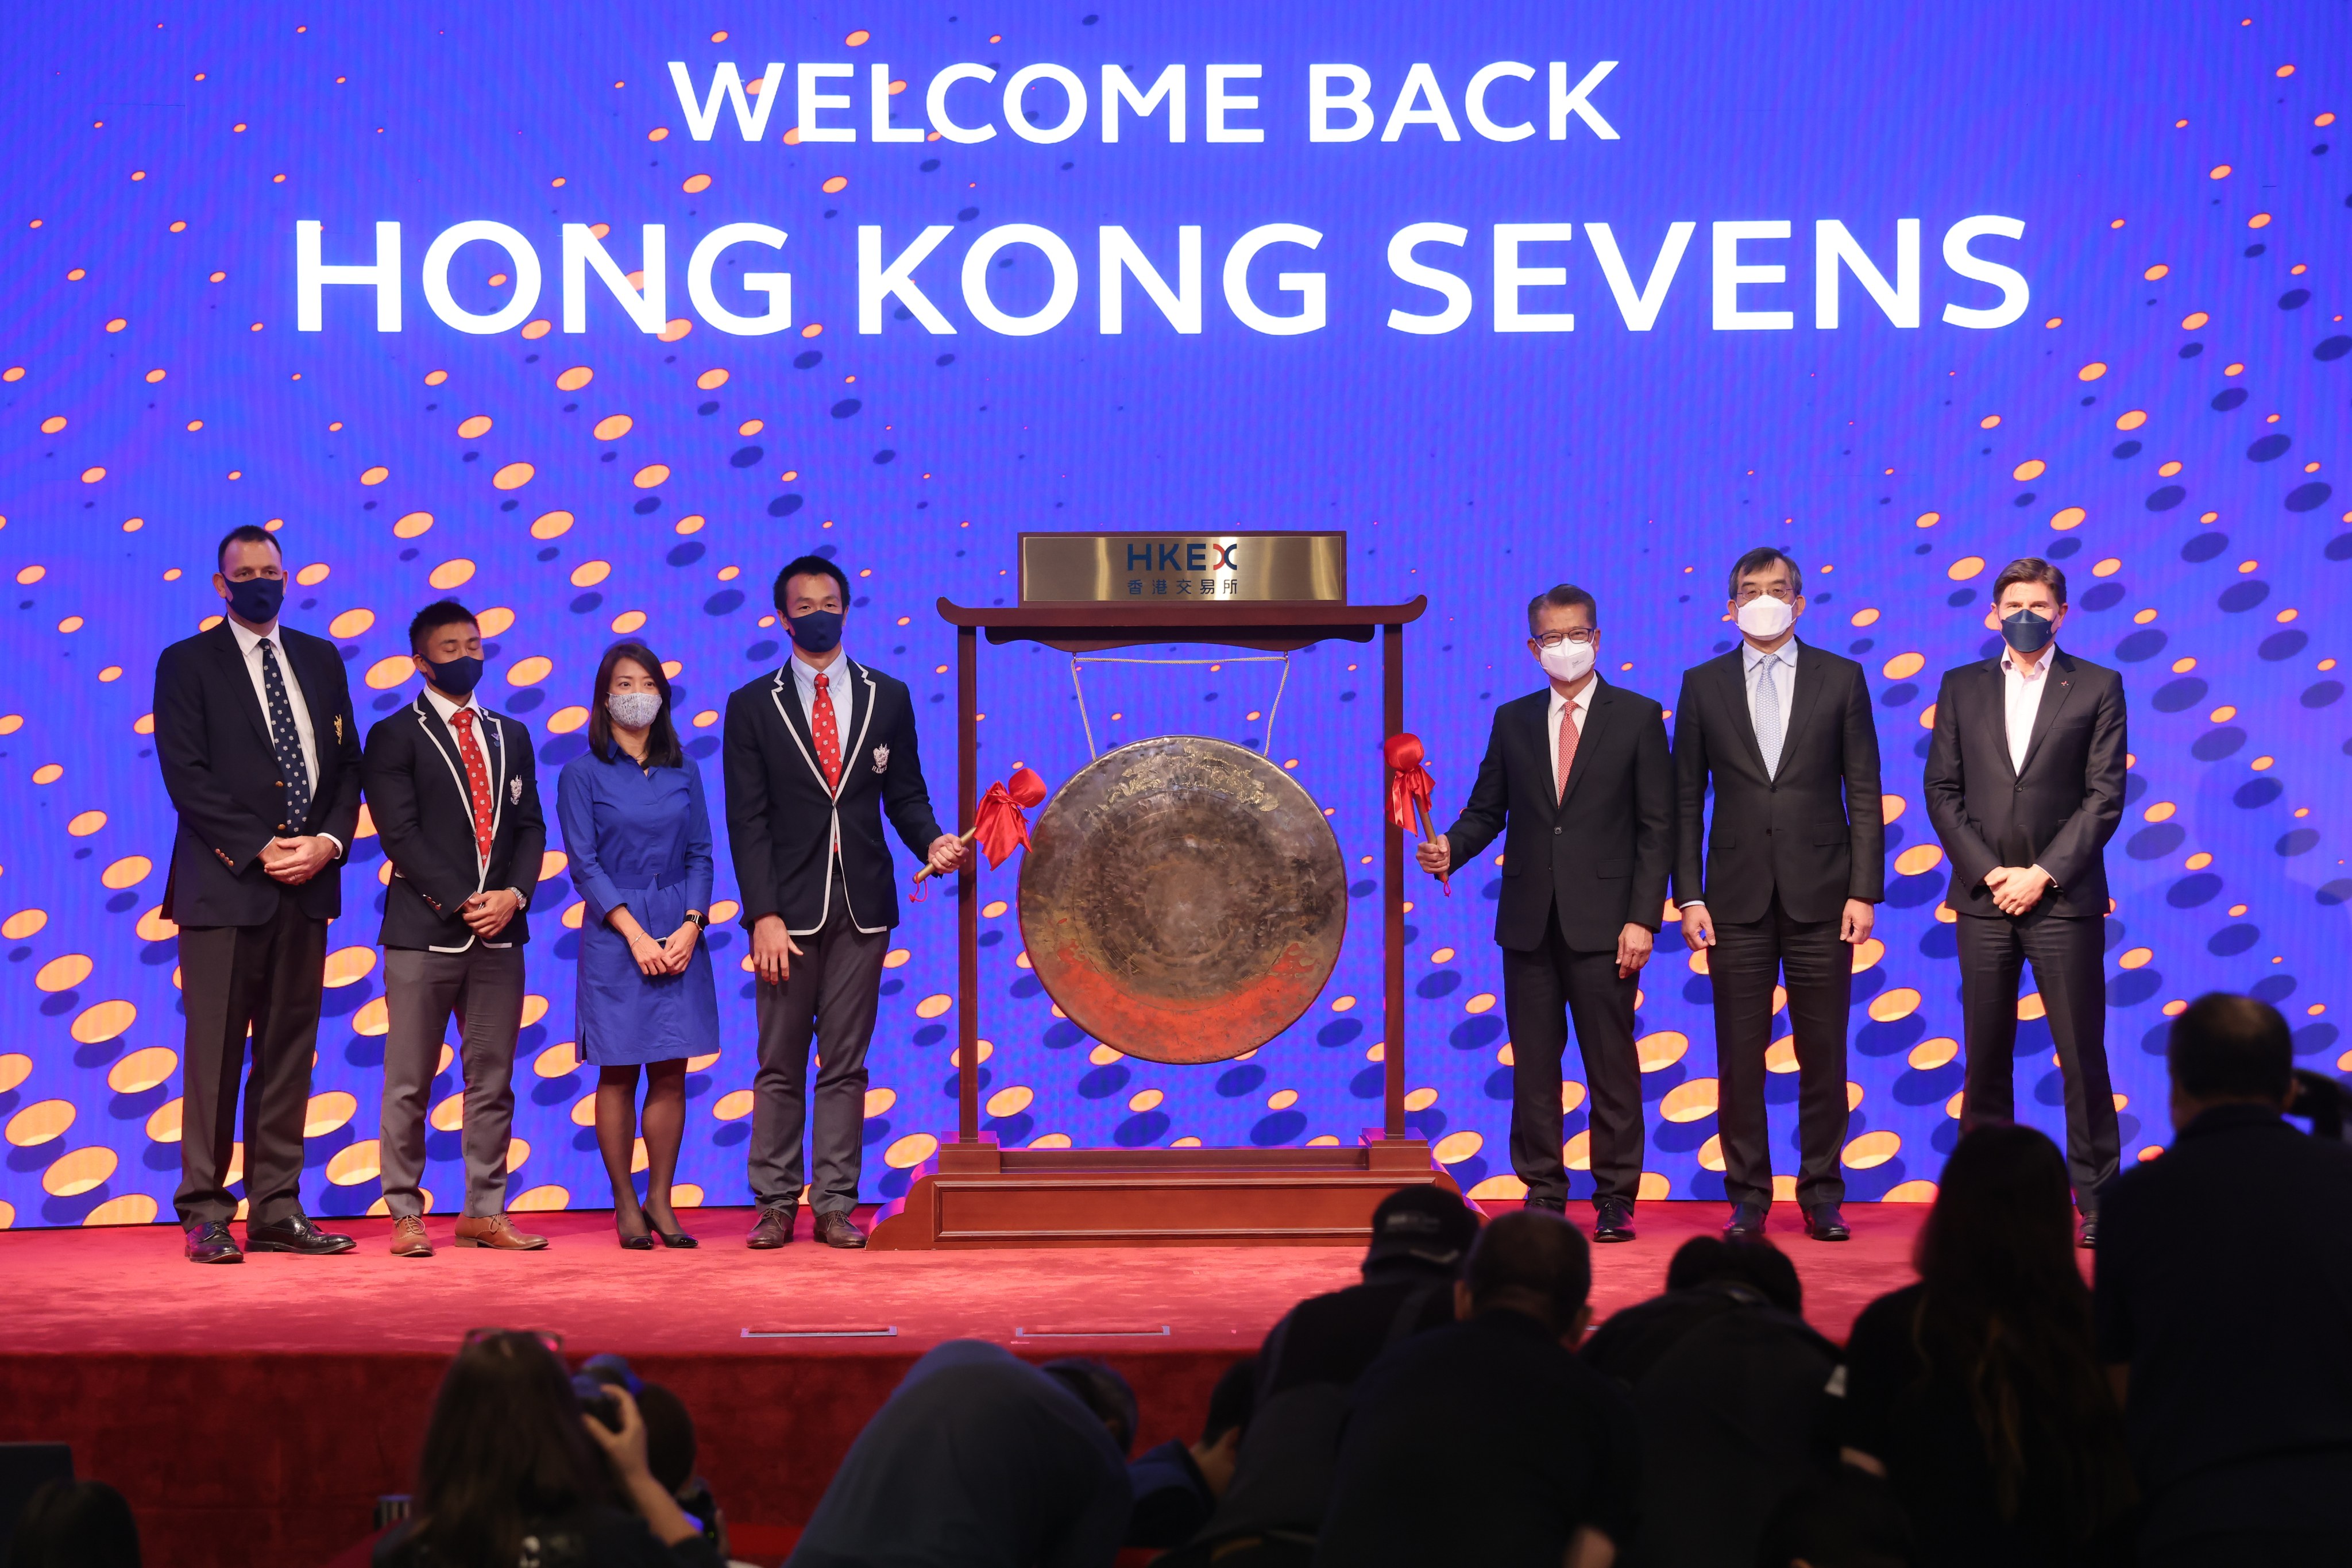 (Left to right) Rugby Union chairman Chris Brooke, Hong men’s sevens squad member Cado Lee, HSBC CEO Luanne Lim, ,men’s player Salom Yiu, Financial Secretary Paul Chan Mo-po, Cathay Pacific Airways CEO Augustus Tang, and HKEX Chairman Nicholas Aguzin, at the Our Hong Kong Sevens kick-off Ceremony at HKEX in Central.
Photos: Jonathan Wong